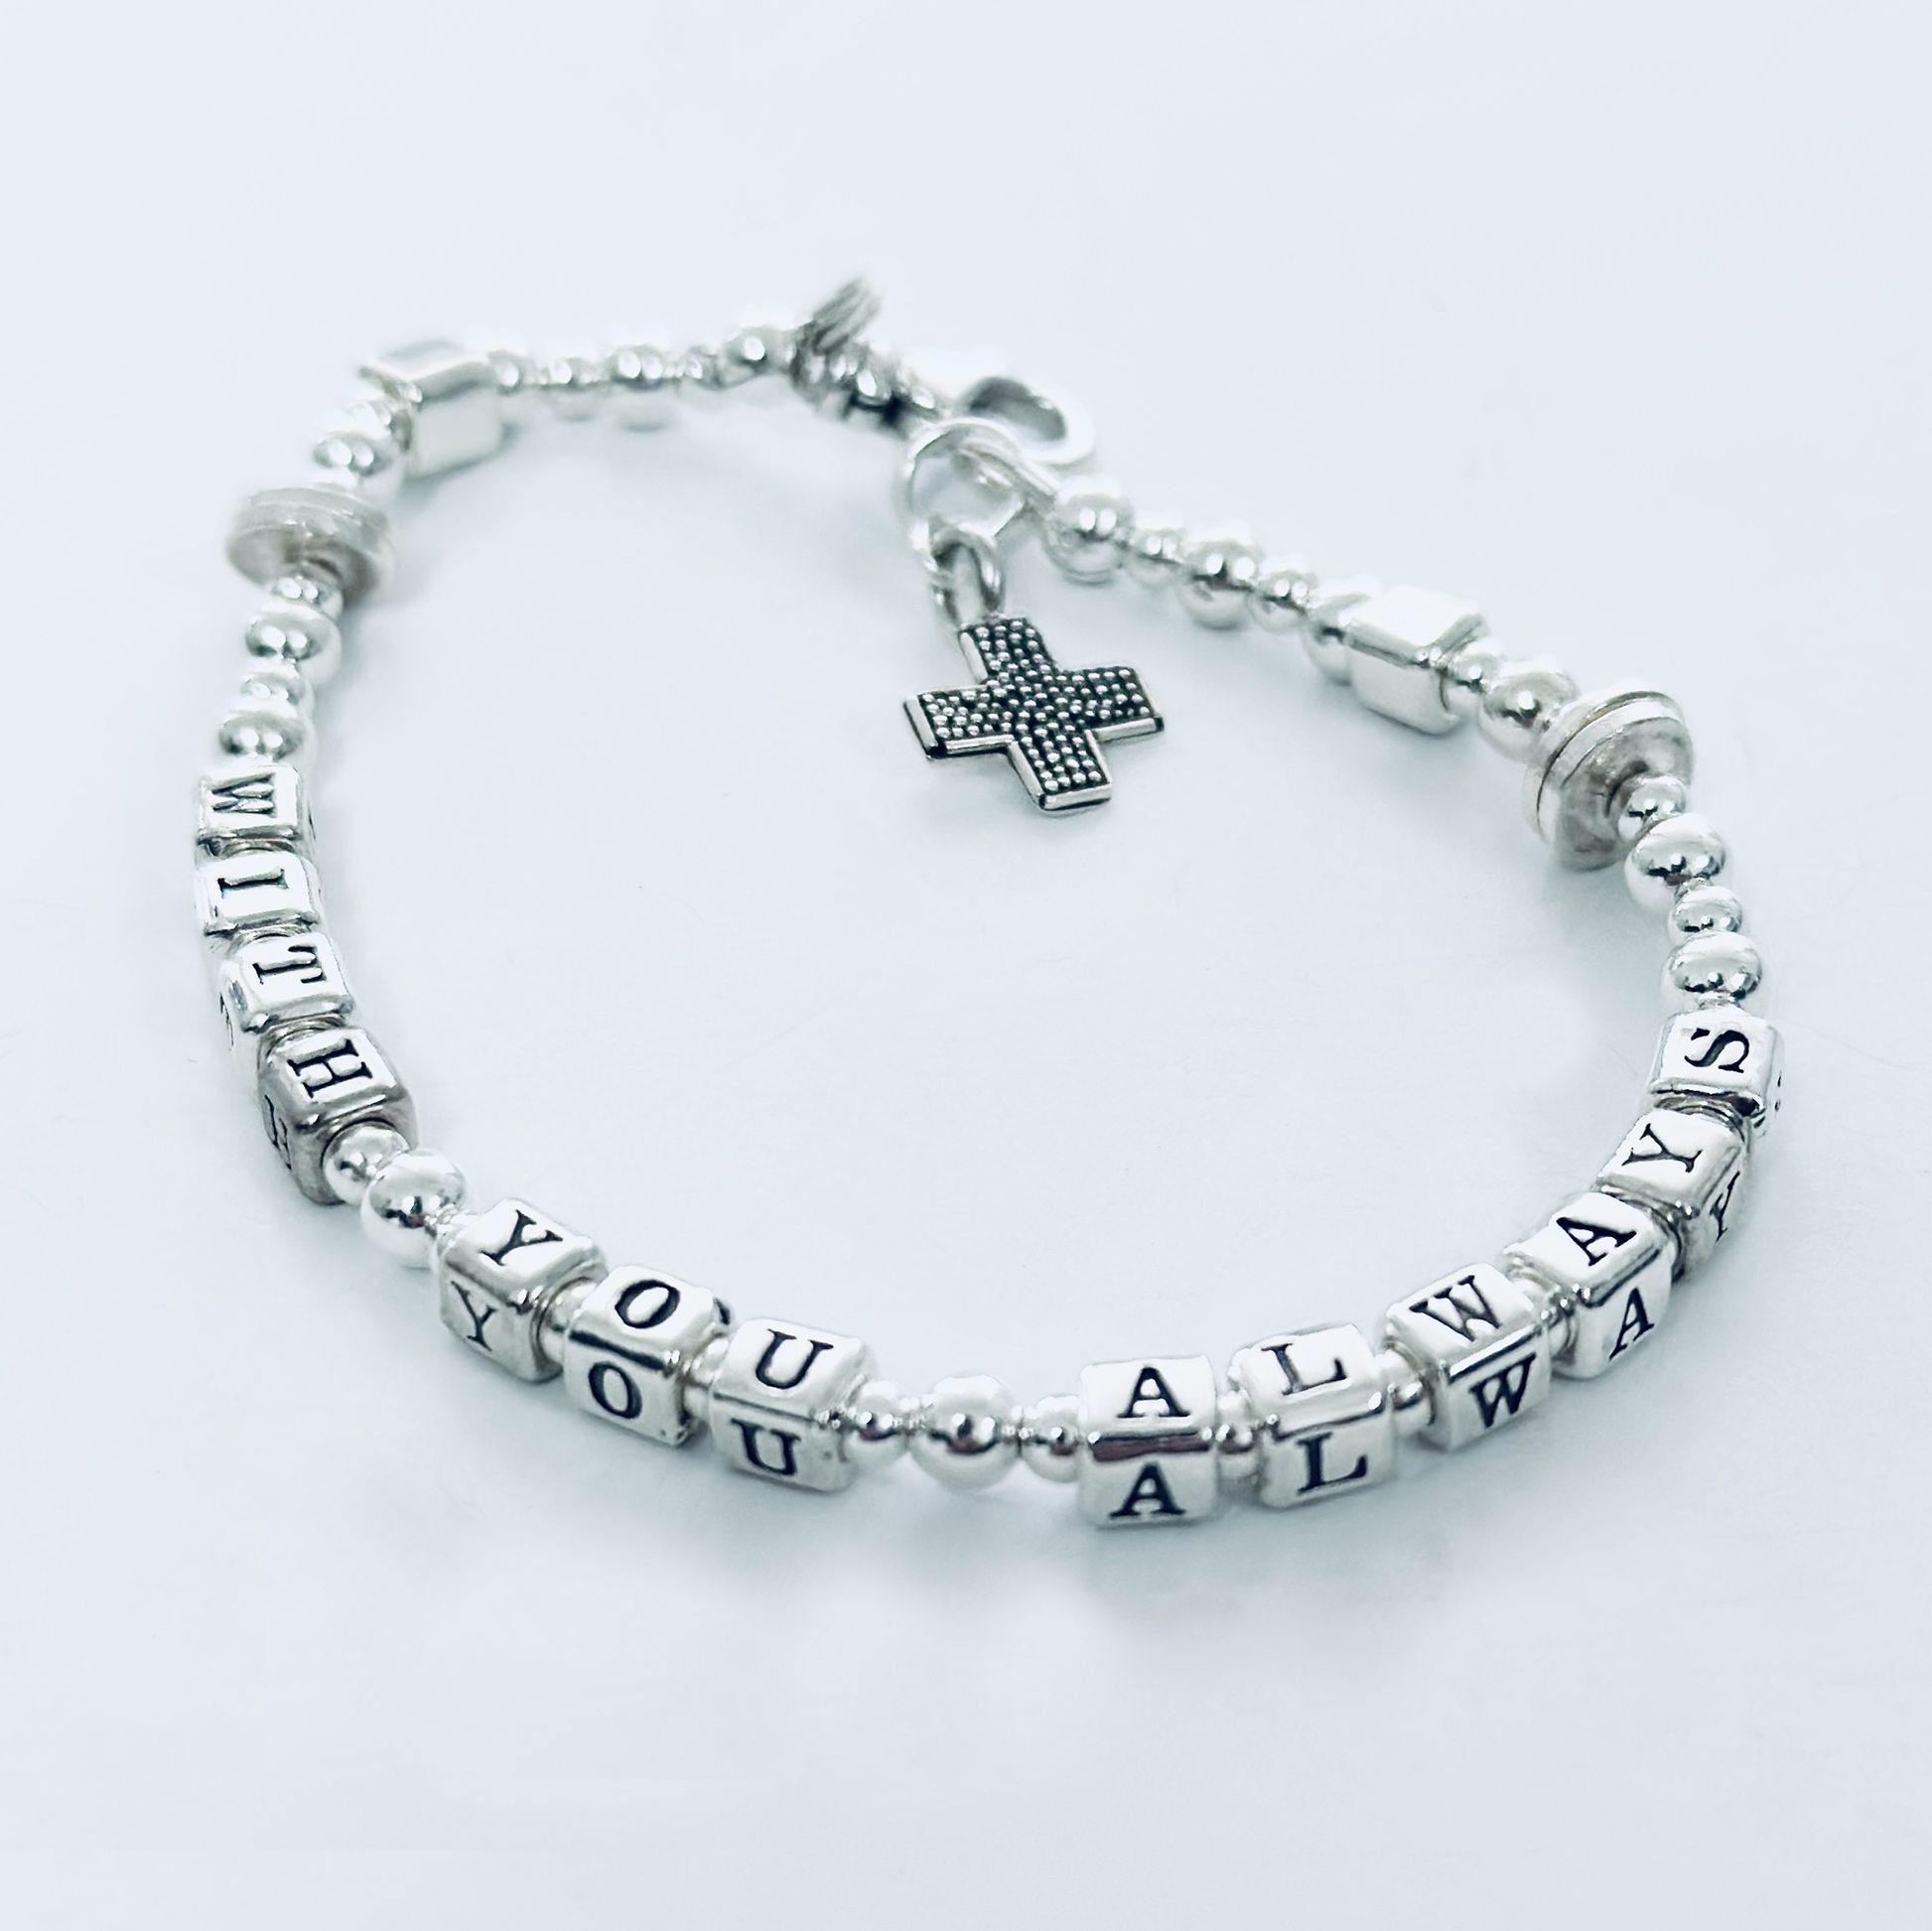 Sterling silver message bracelet with cross charm spells out bible verse Matthew 28:20, "With You Always" 